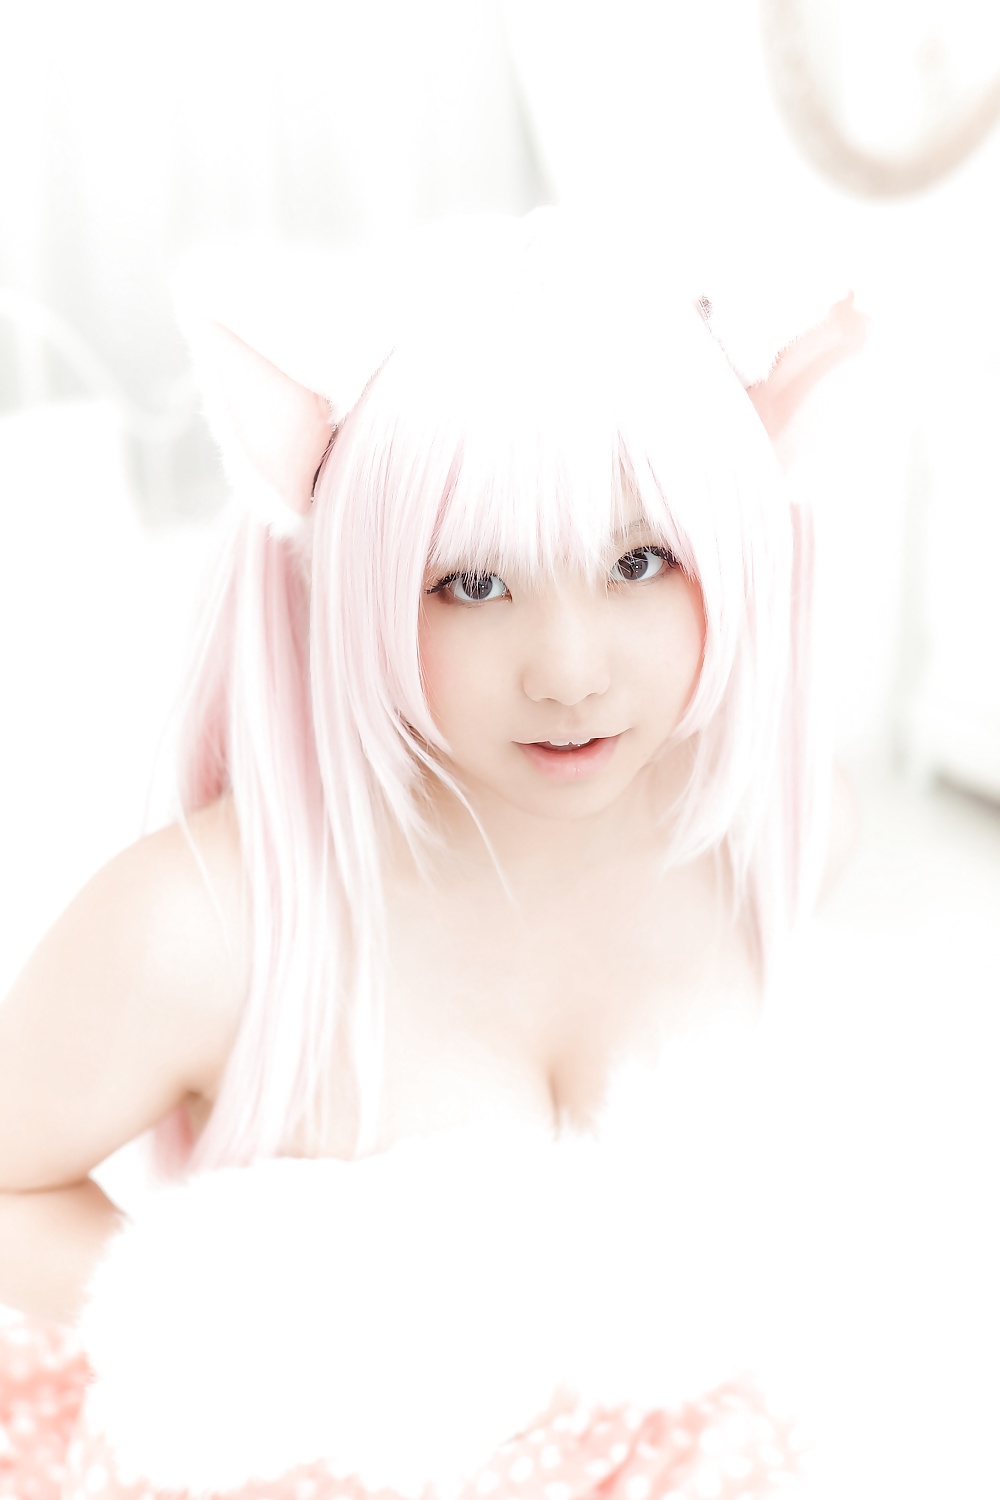 Asiatica cosplay in bianco
 #26559006